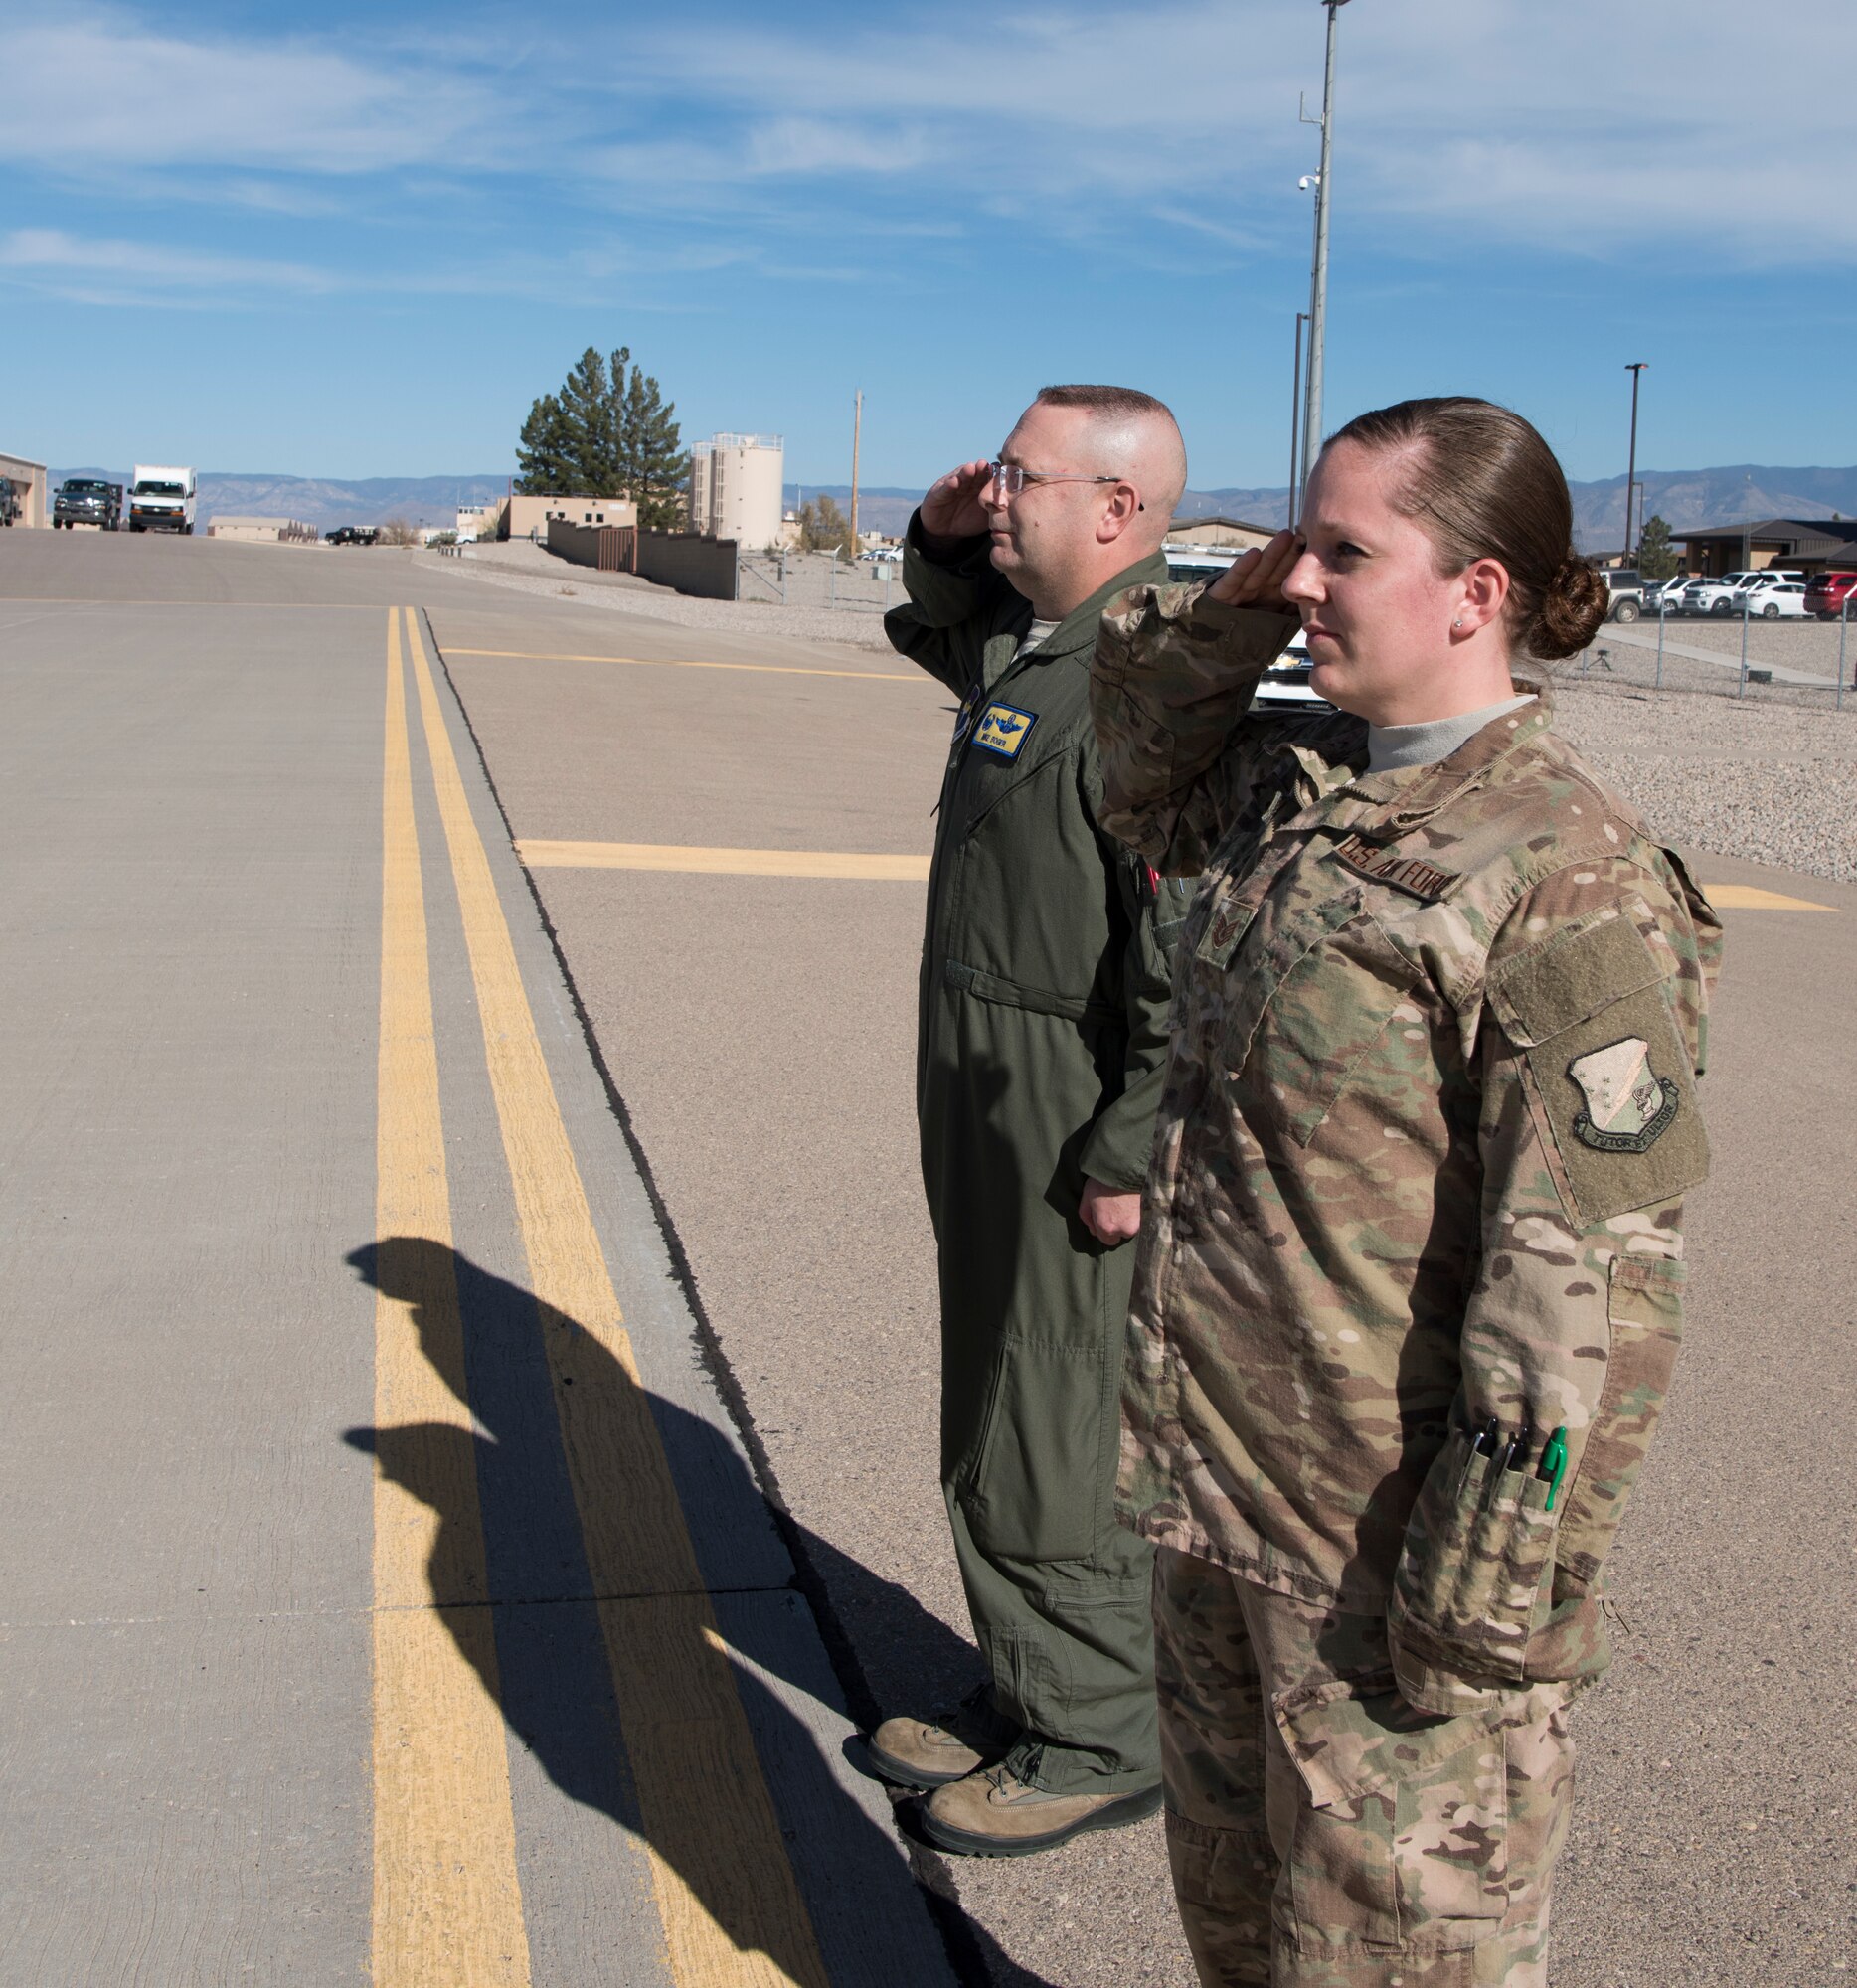 Col. Michael Boger, 54th Fighter Group commander and Tech. Sgt. Whitney O’Neill, 49th Wing protocol specialist, salute as Gen. Paul Selva, vice chairman of the Joint Chiefs of Staff, departs Holloman Air Force Base, N.M., November 14, 2018. Selva visited Holloman and White Sands Missile Range November 13 to 14. (U.S. Air Force photo by Staff Sgt. BreeAnn Sachs).